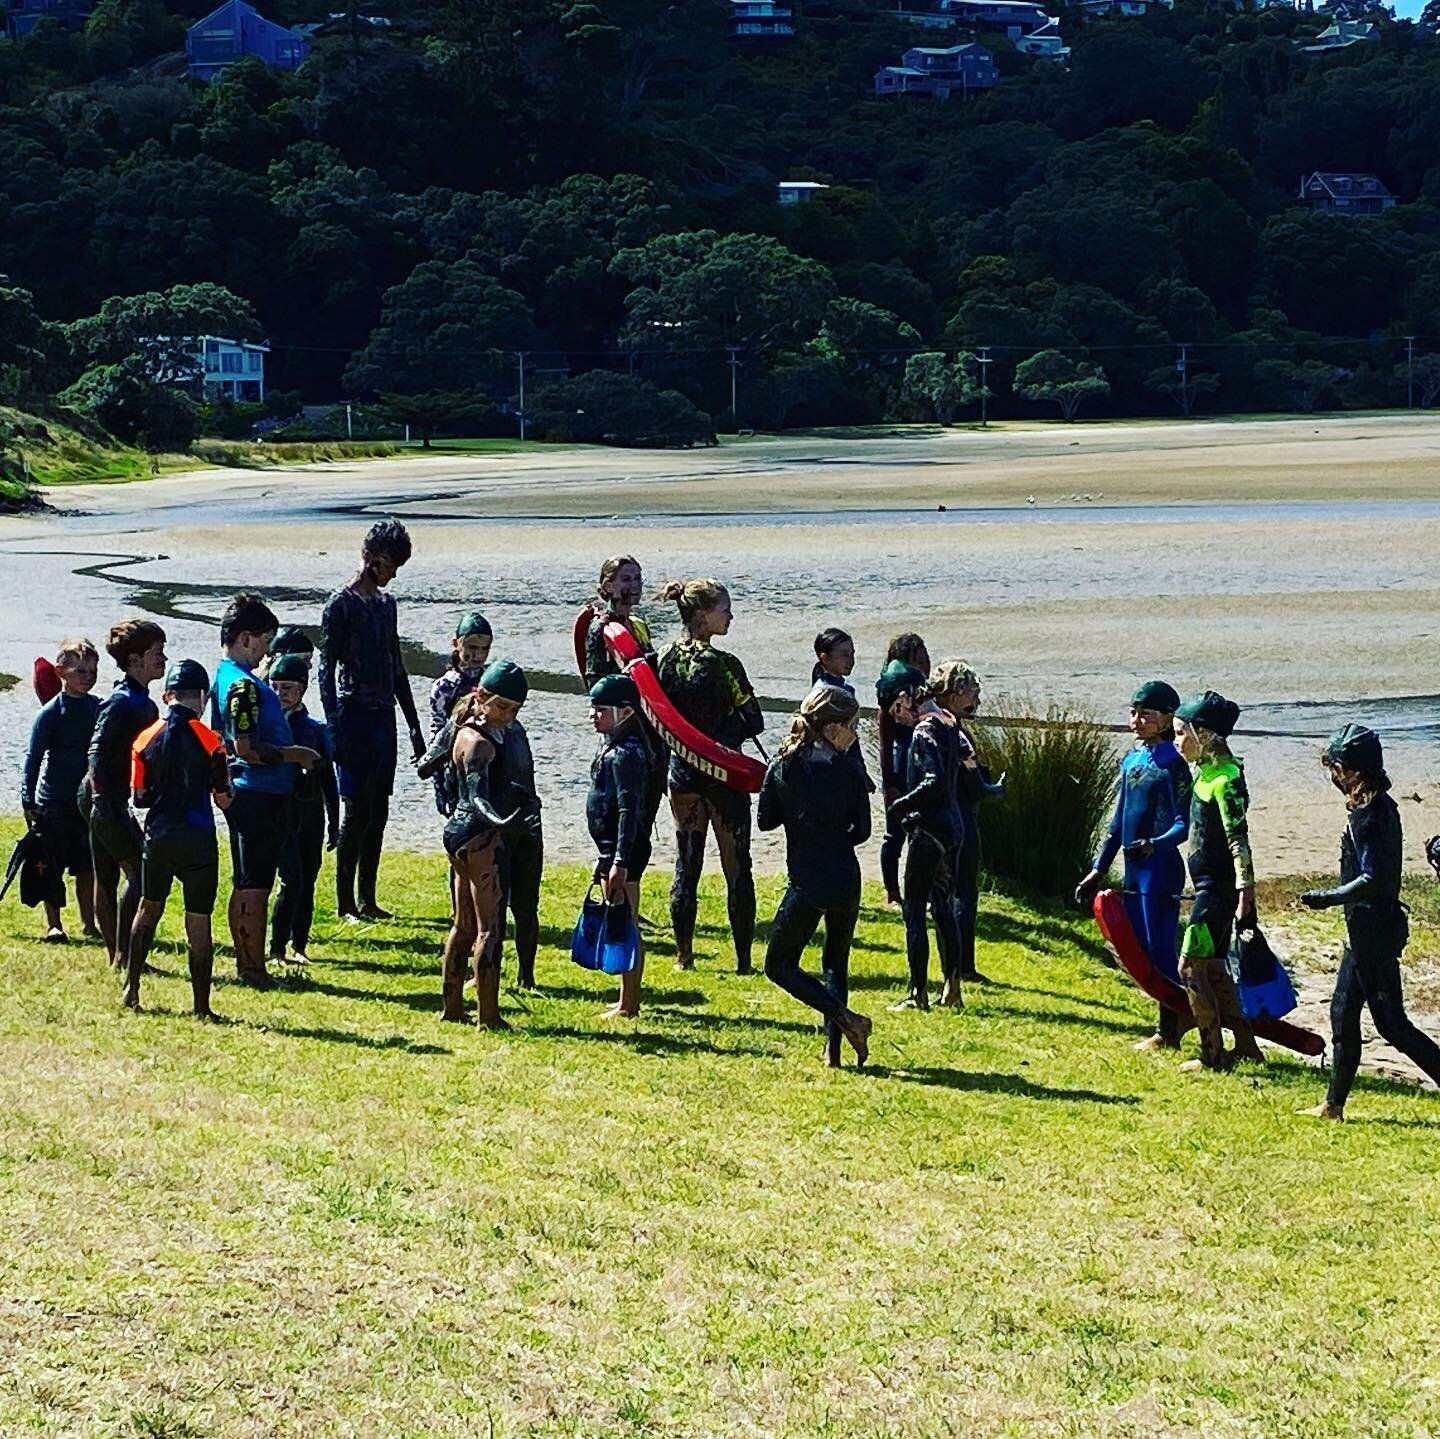 Tairua Surf Life Saving Club - We saw these guys yesterday on our walk.  Bella is now a qualified Surf Lifeguard &amp; patrols Tairua Beach each summer.  This here is a 3 week summer holiday programme for 5 - 13 yr olds to learn about water safety + 